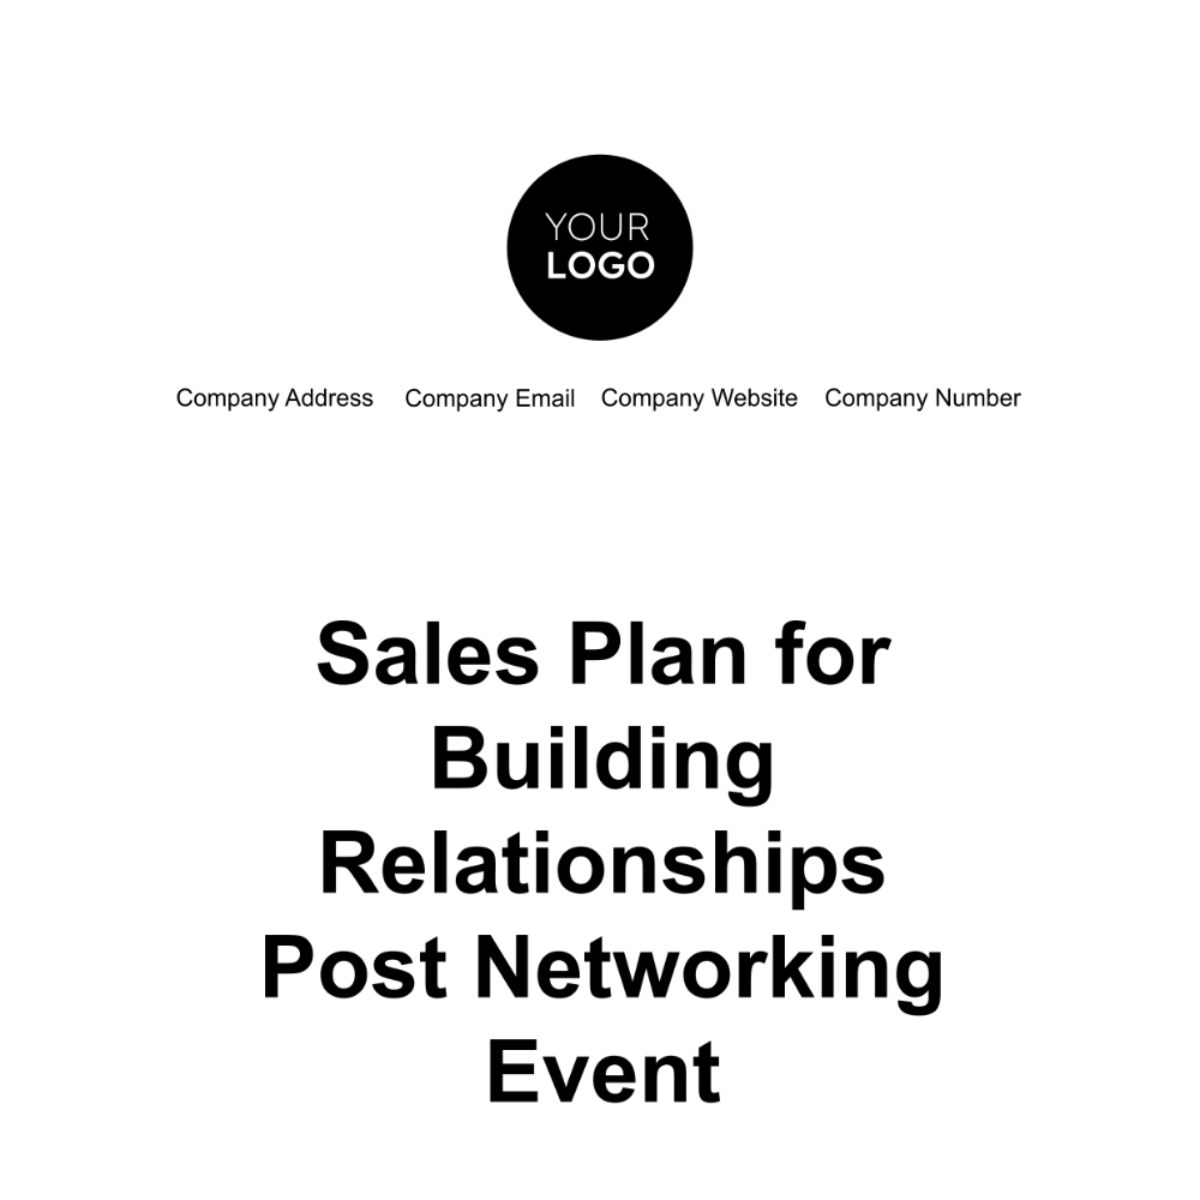 Sales Plan for Building Relationships Post Networking Event Template